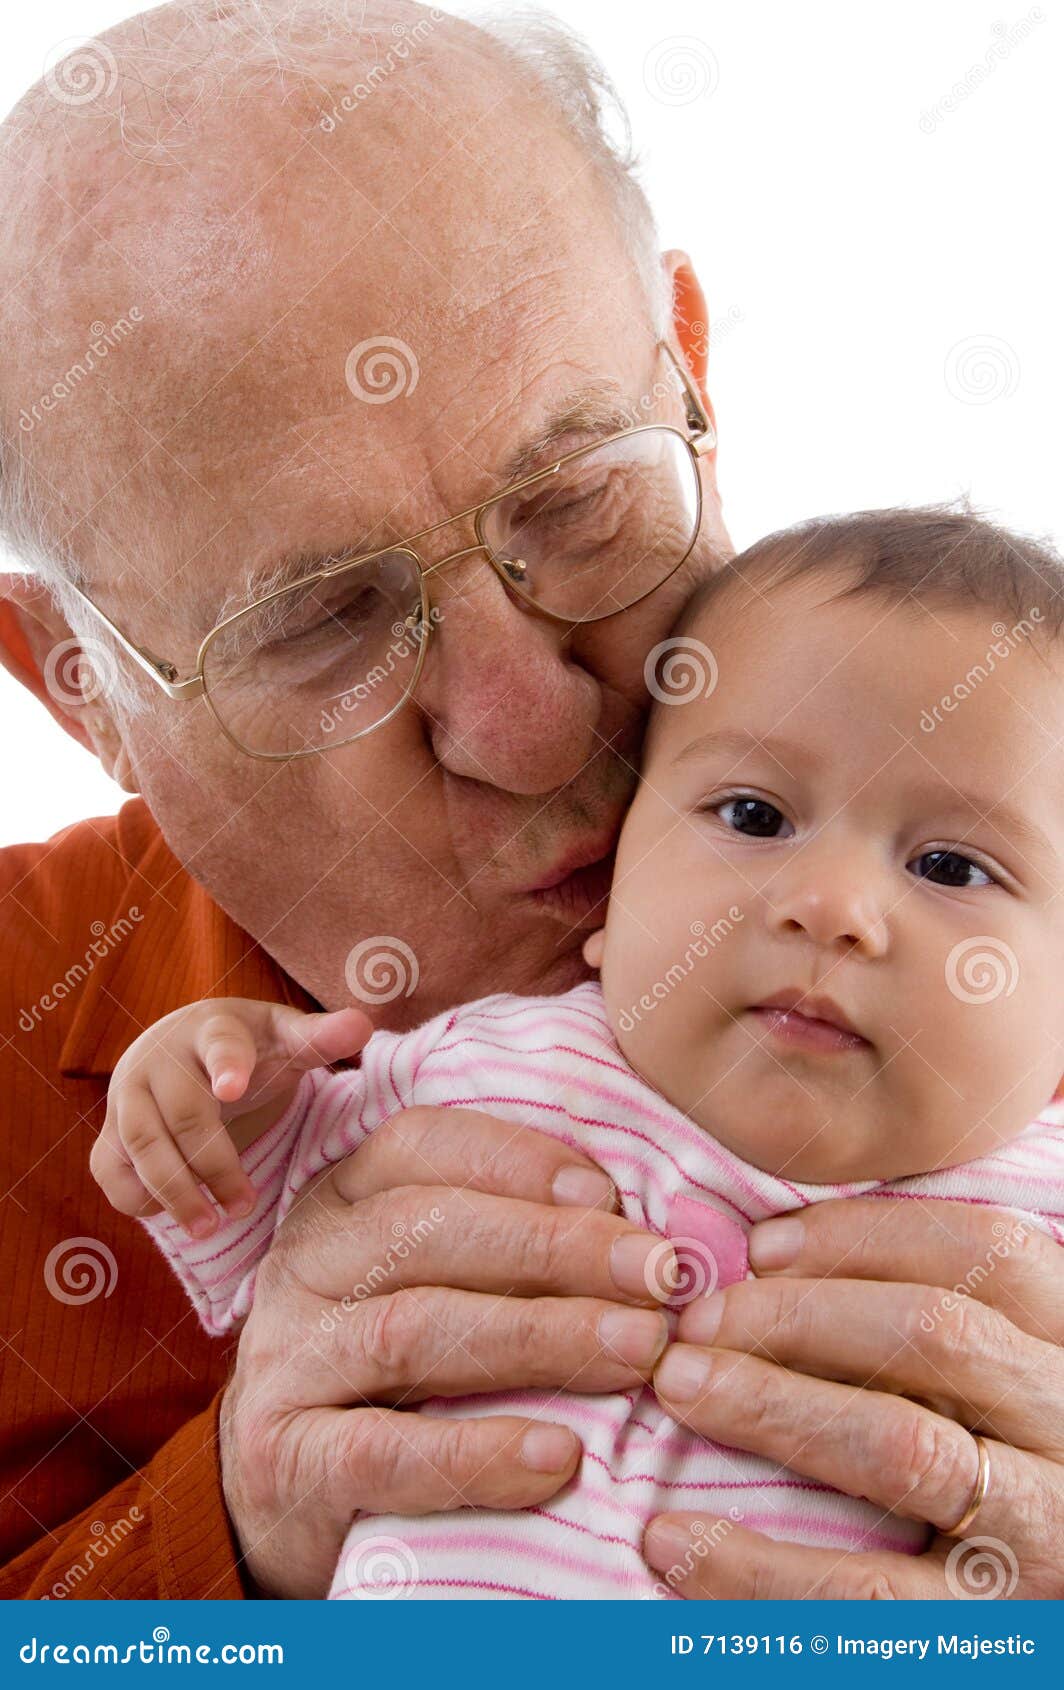 Old Man Kissing The Cute Baby Royalty Free Stock Image - Image: 7139116